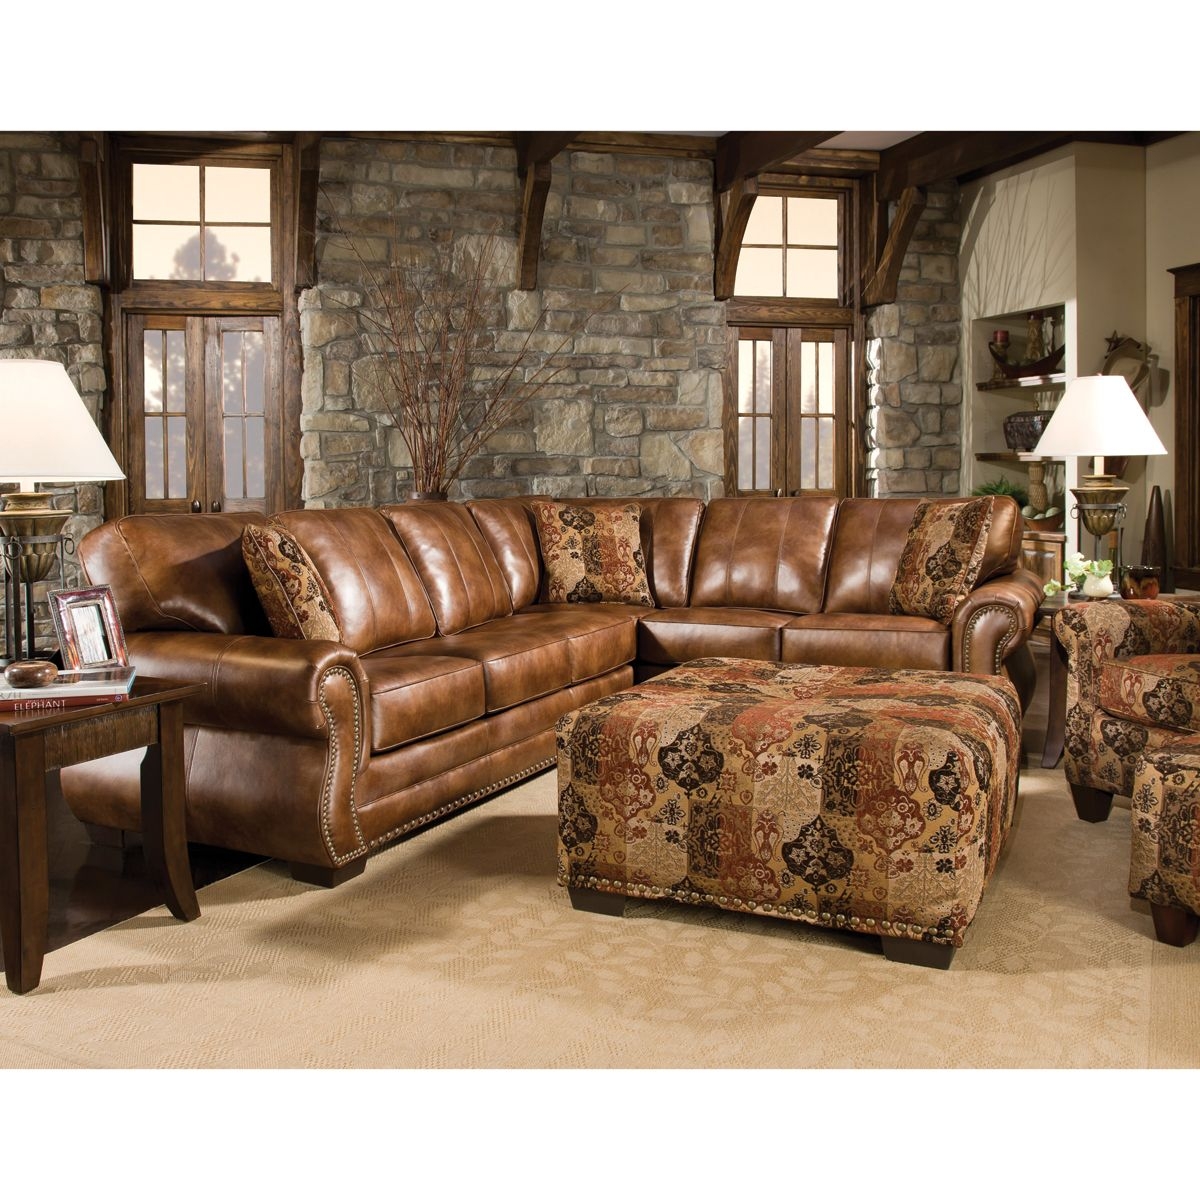 Leather nailhead sectional 23